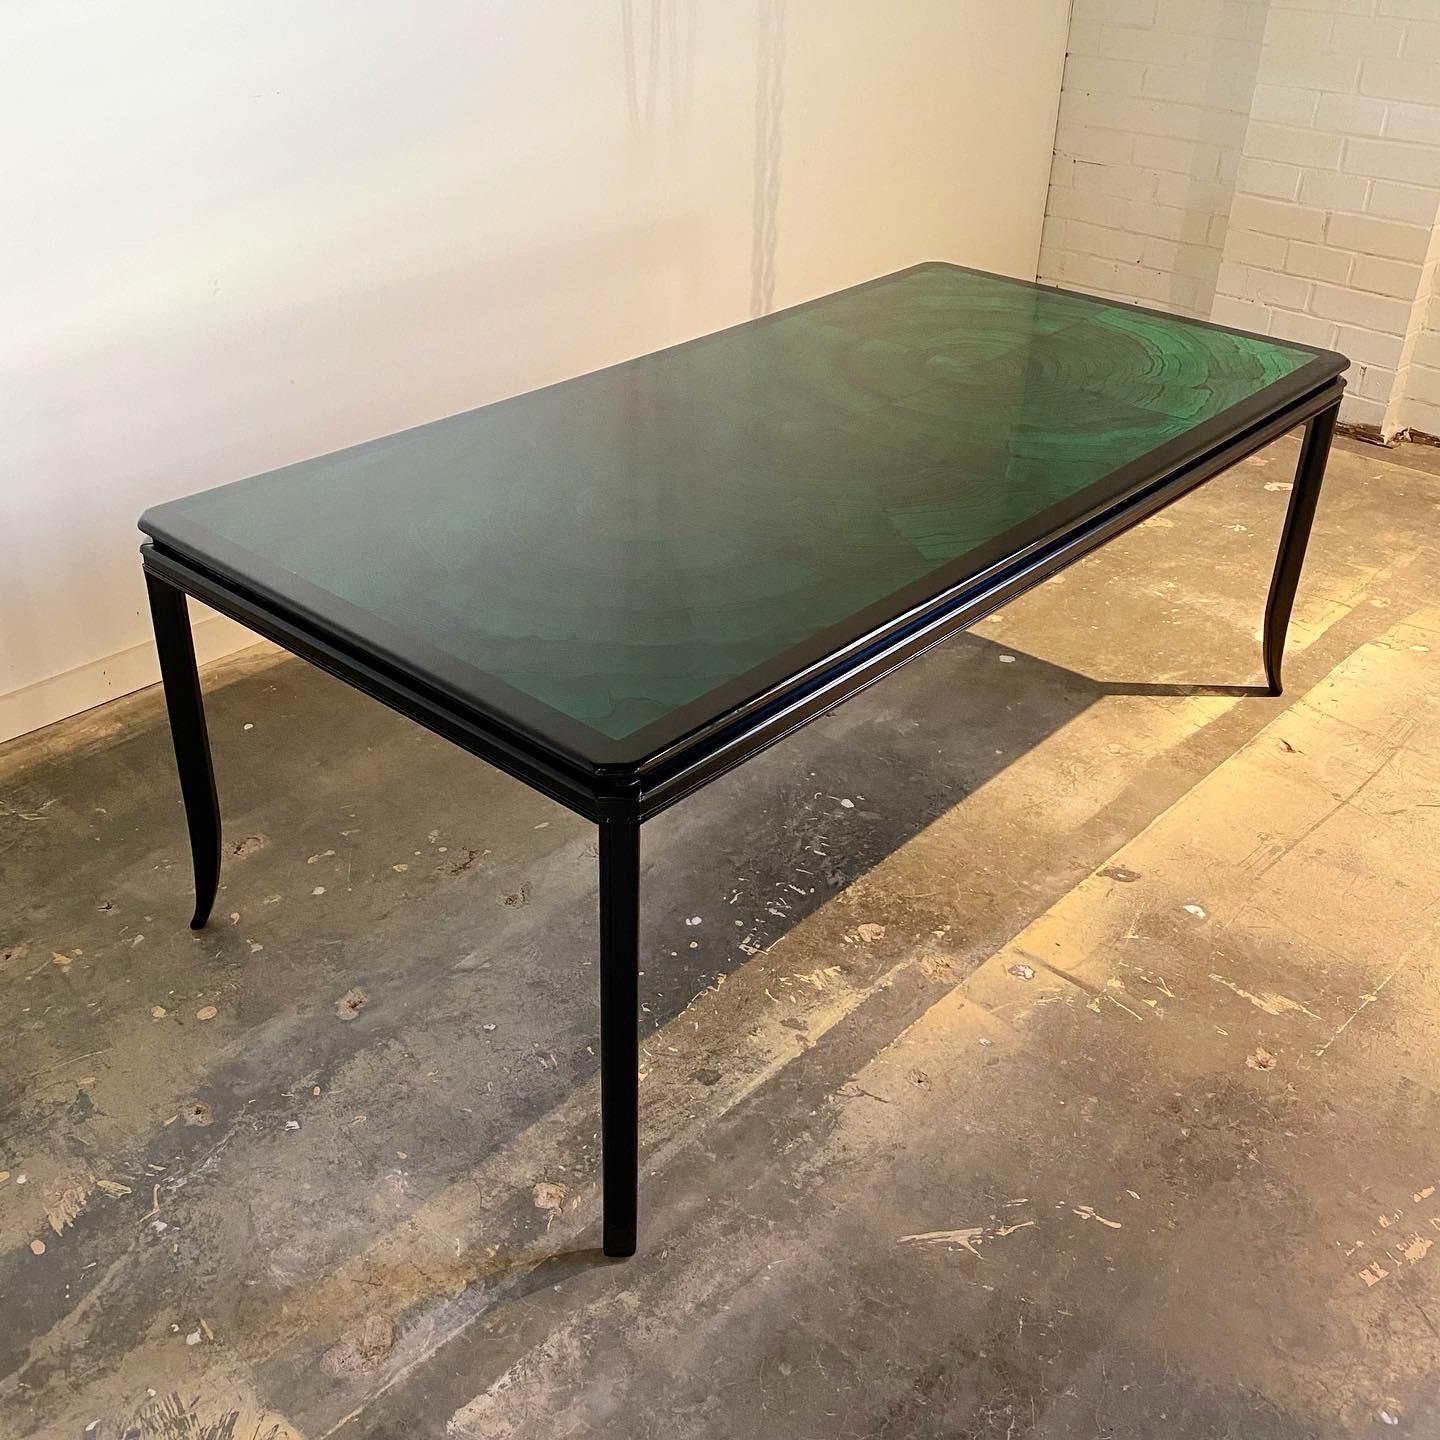 A vintage glam faux malachite dining table. This is a unique example in very good vintage condition. Although the table shows some signs of age and use the striking color and hand painted design show wonderfully.